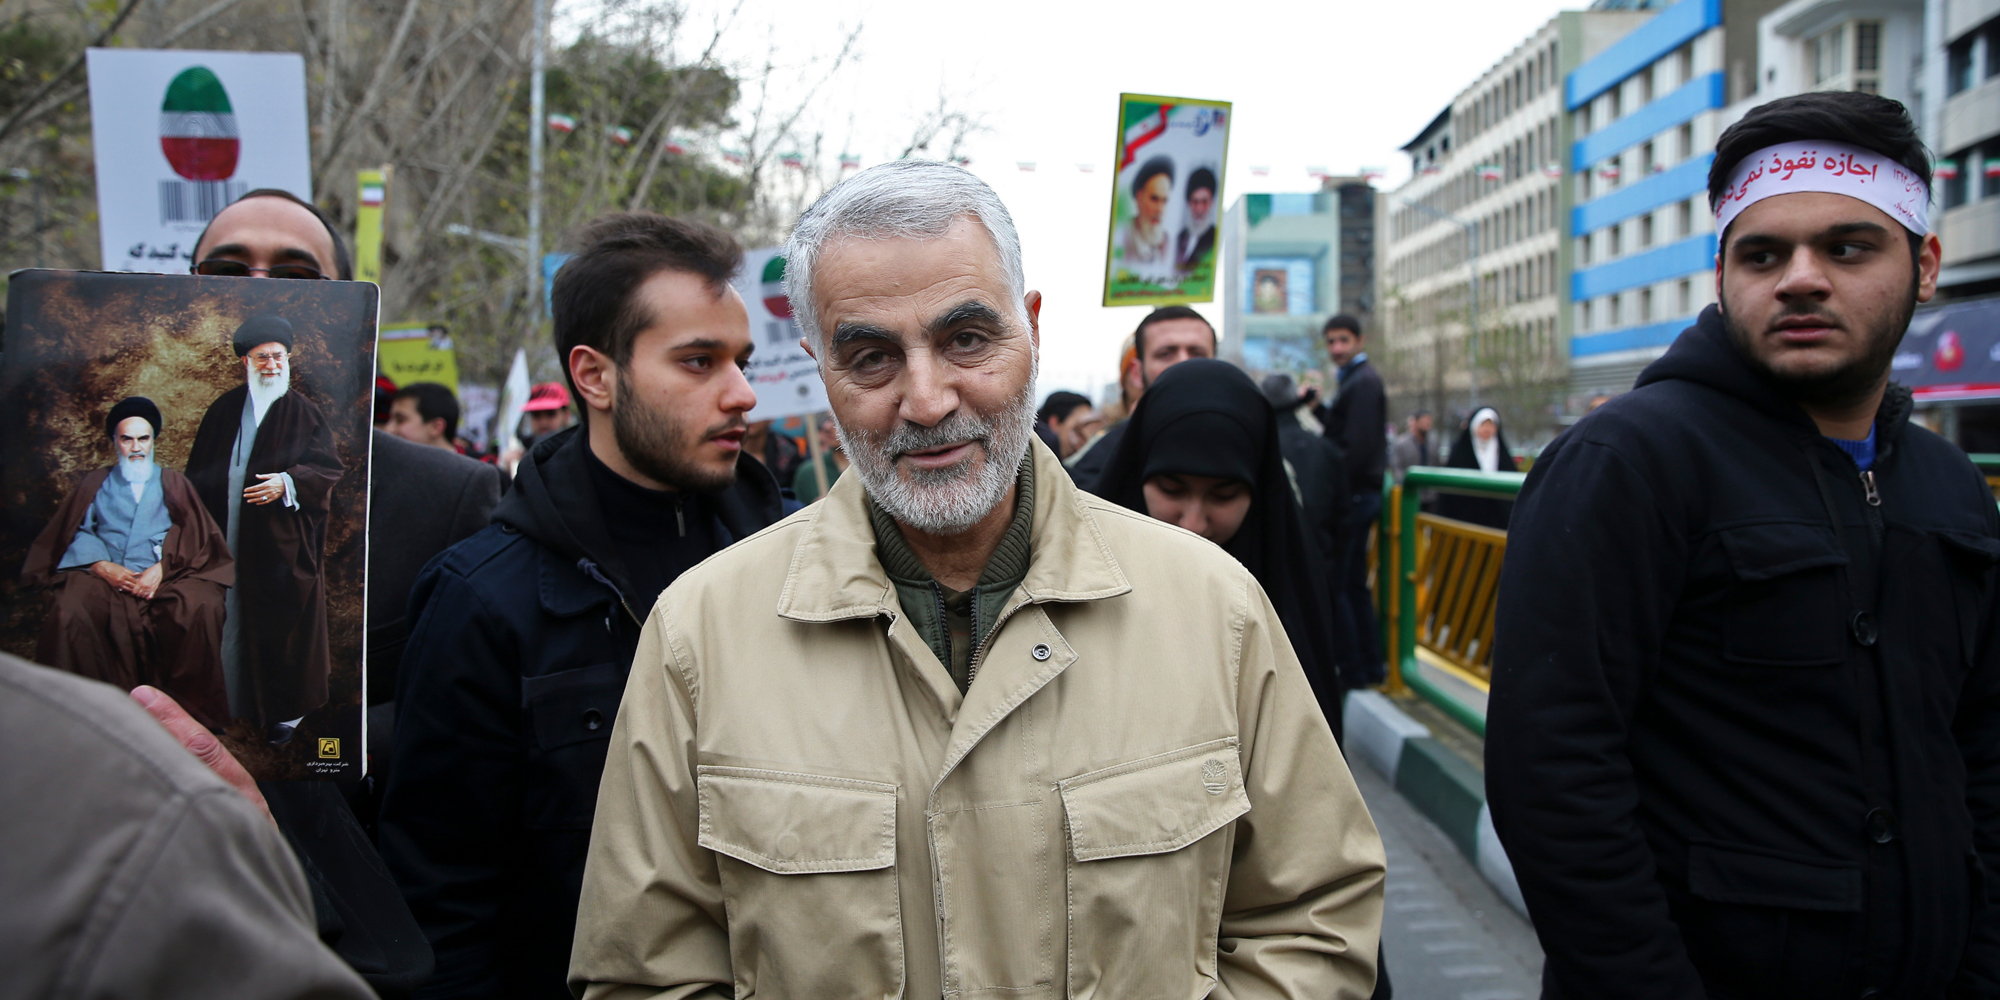 FILE -- In this Feb. 11, 2016 file photo, Revolutionary Guard Gen. Qassem Soleimani attends an annual rally commemorating the anniversary of the 1979 Islamic revolution, in Tehran, Iran. As Saudi Arabia holds a naval drill in the strategic Strait of Hormuz, Soleimani, a powerful Iranian general was quoted, Wednesday, Oct. 5, 2016, by the semi-official Fars and Tasnim news agencies as suggesting the kingdom's deputy crown prince is so "impatient" he may kill his own father to take the throne. While harsh rhetoric has been common between the two rivals since January, the outrageous comments by Soleimani take things to an entirely different level by outright discussing Saudi King Salman being killed. (AP Photo/Ebrahim Noroozi, File)